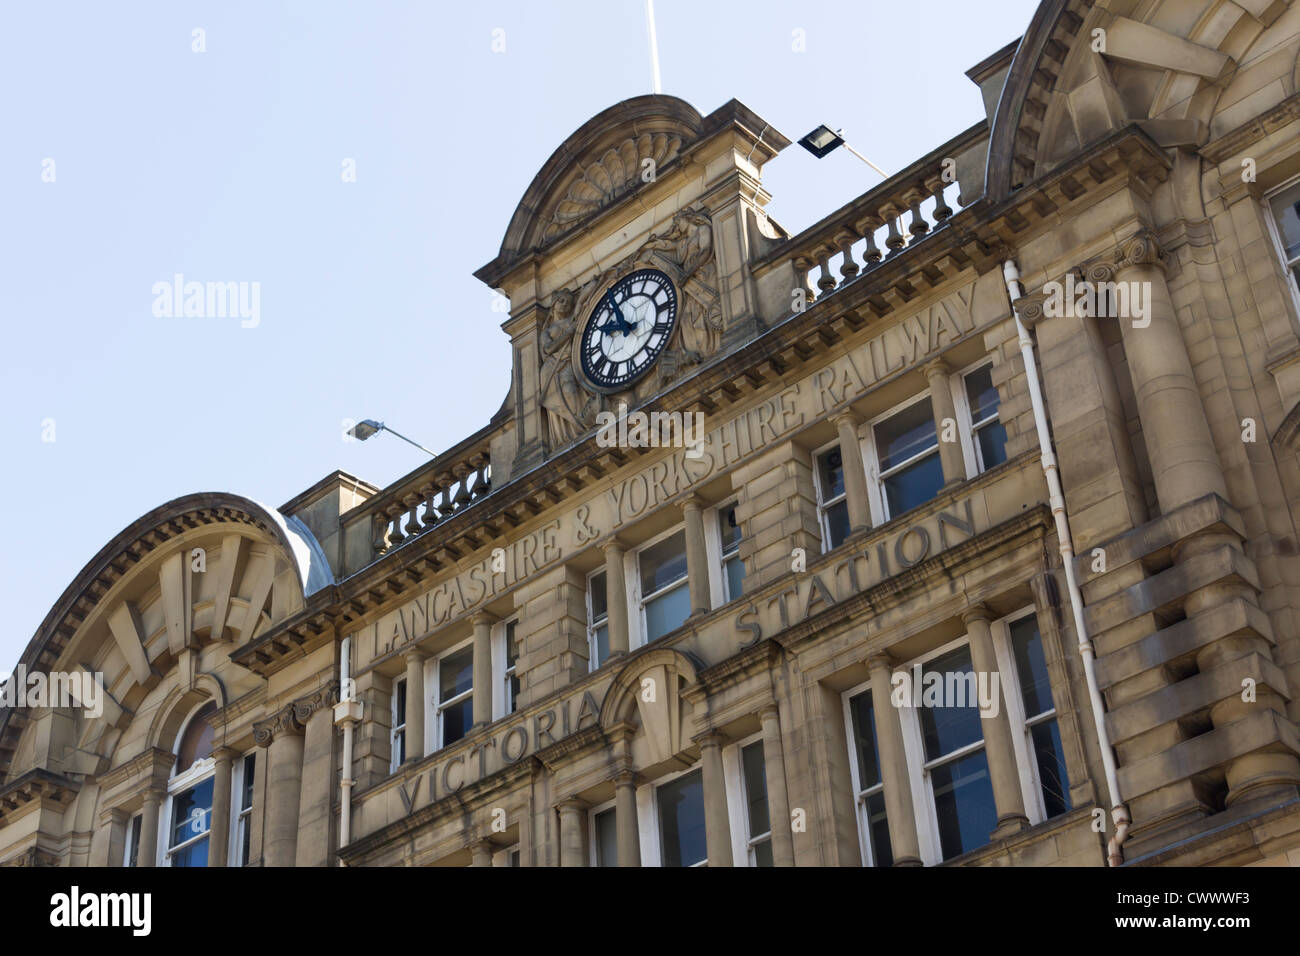 Main facade of Manchester Victoria railway station showing the clock and  Lancashire and Yorkshire Railway inscription. Stock Photo